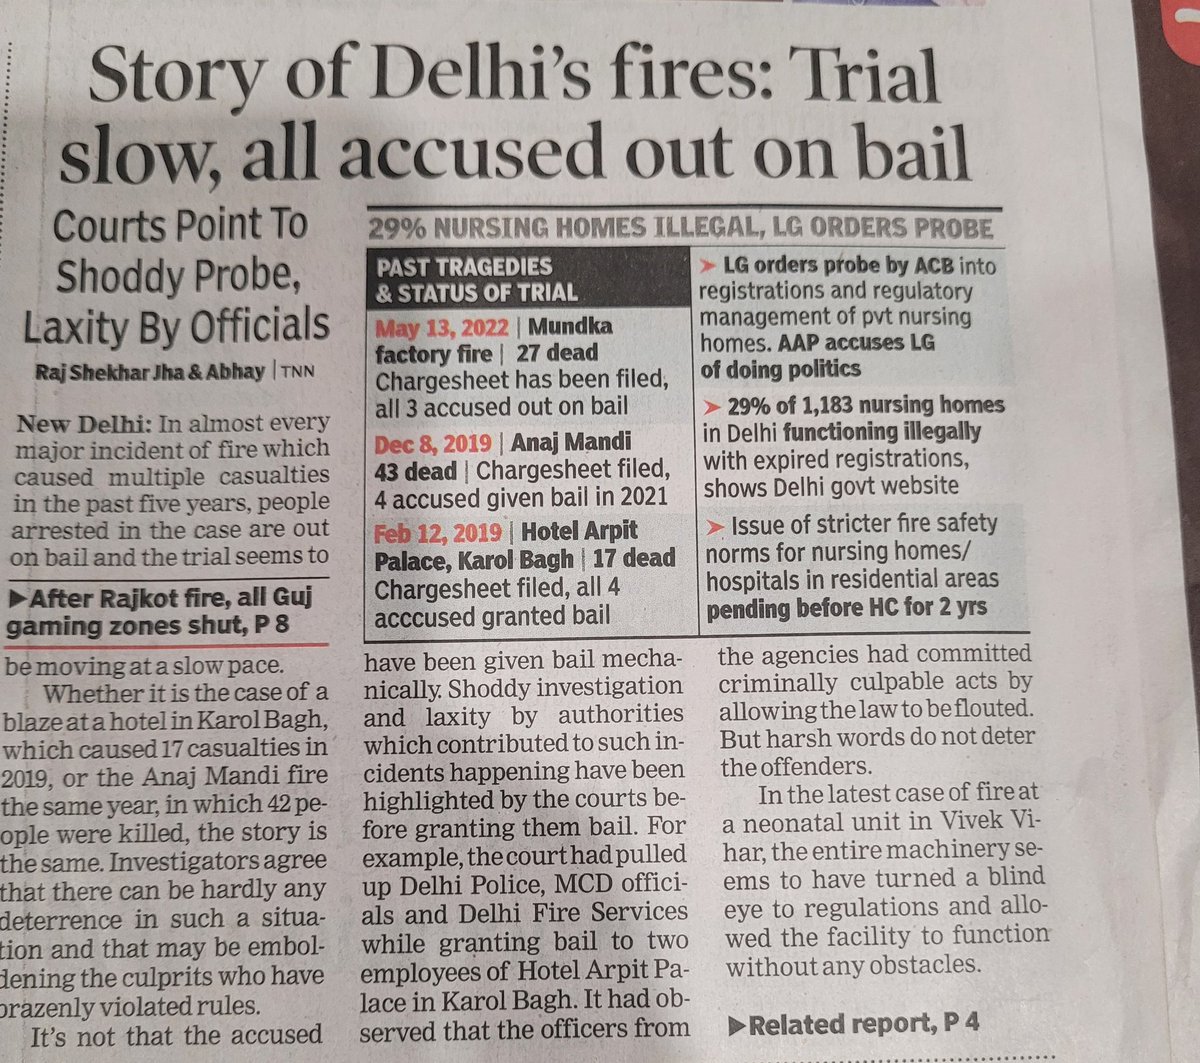 The most corrupt #DelhiGovernment under thief @ArvindKejriwal & his @AamAadmiParty has ruined #Delhi. 😠 😡 #Modi government & #CJIChandrachud   are watching loss of lives of #Delhities in such massive fire 🔥 incidents. No corrupt official, who cleared such buildings is jailed.